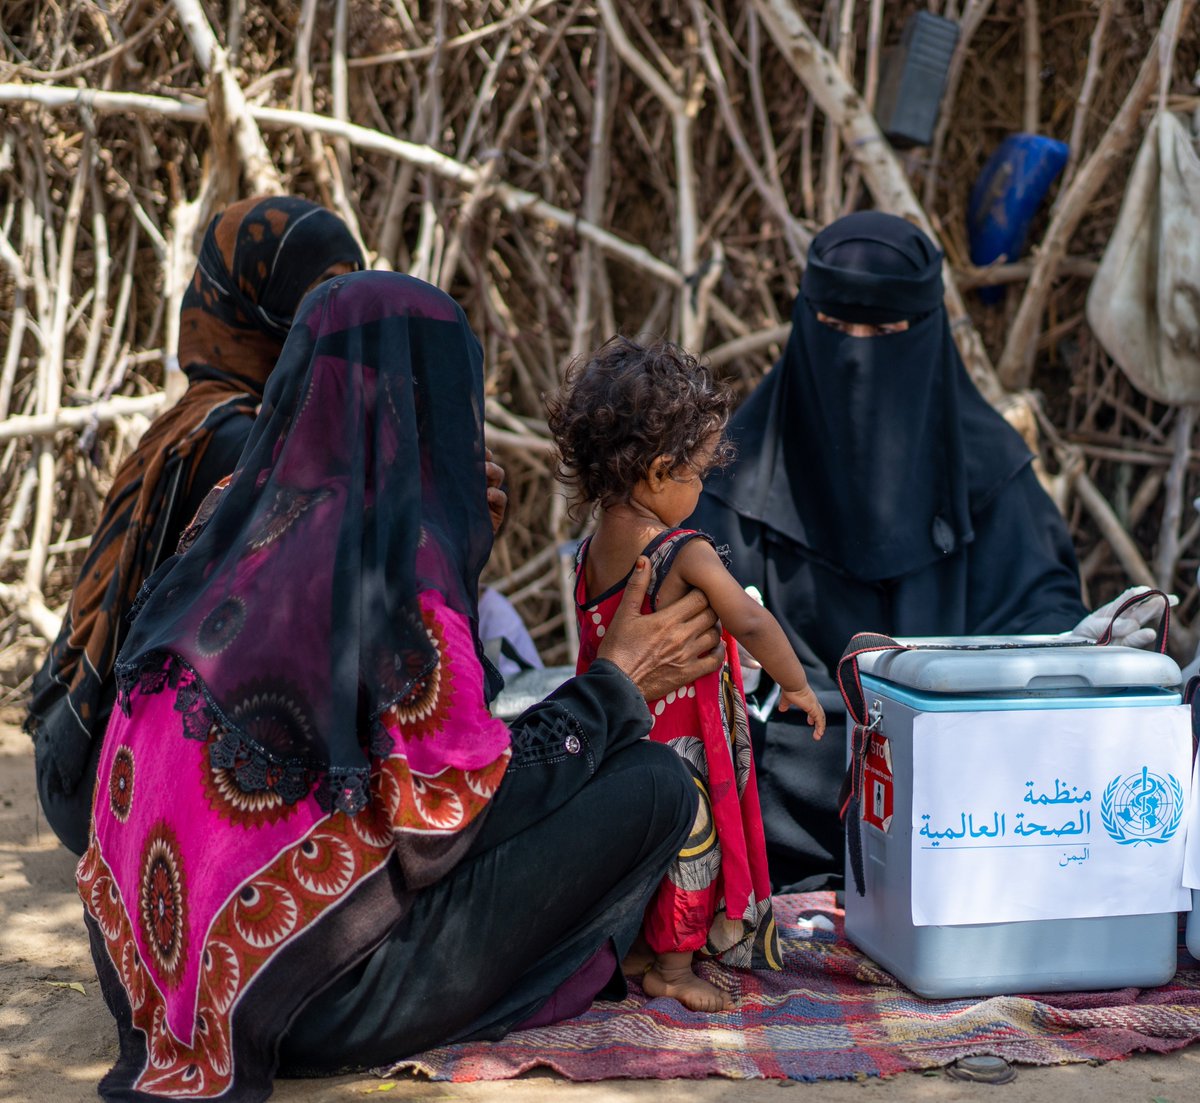 Vulnerable groups continue to bear the brunt of the crisis. Such groups include internally displaced people, children, women, elderly people, and people with disabilities and mental health conditions. All people have the right to health. 🔗shorturl.at/BKZ56